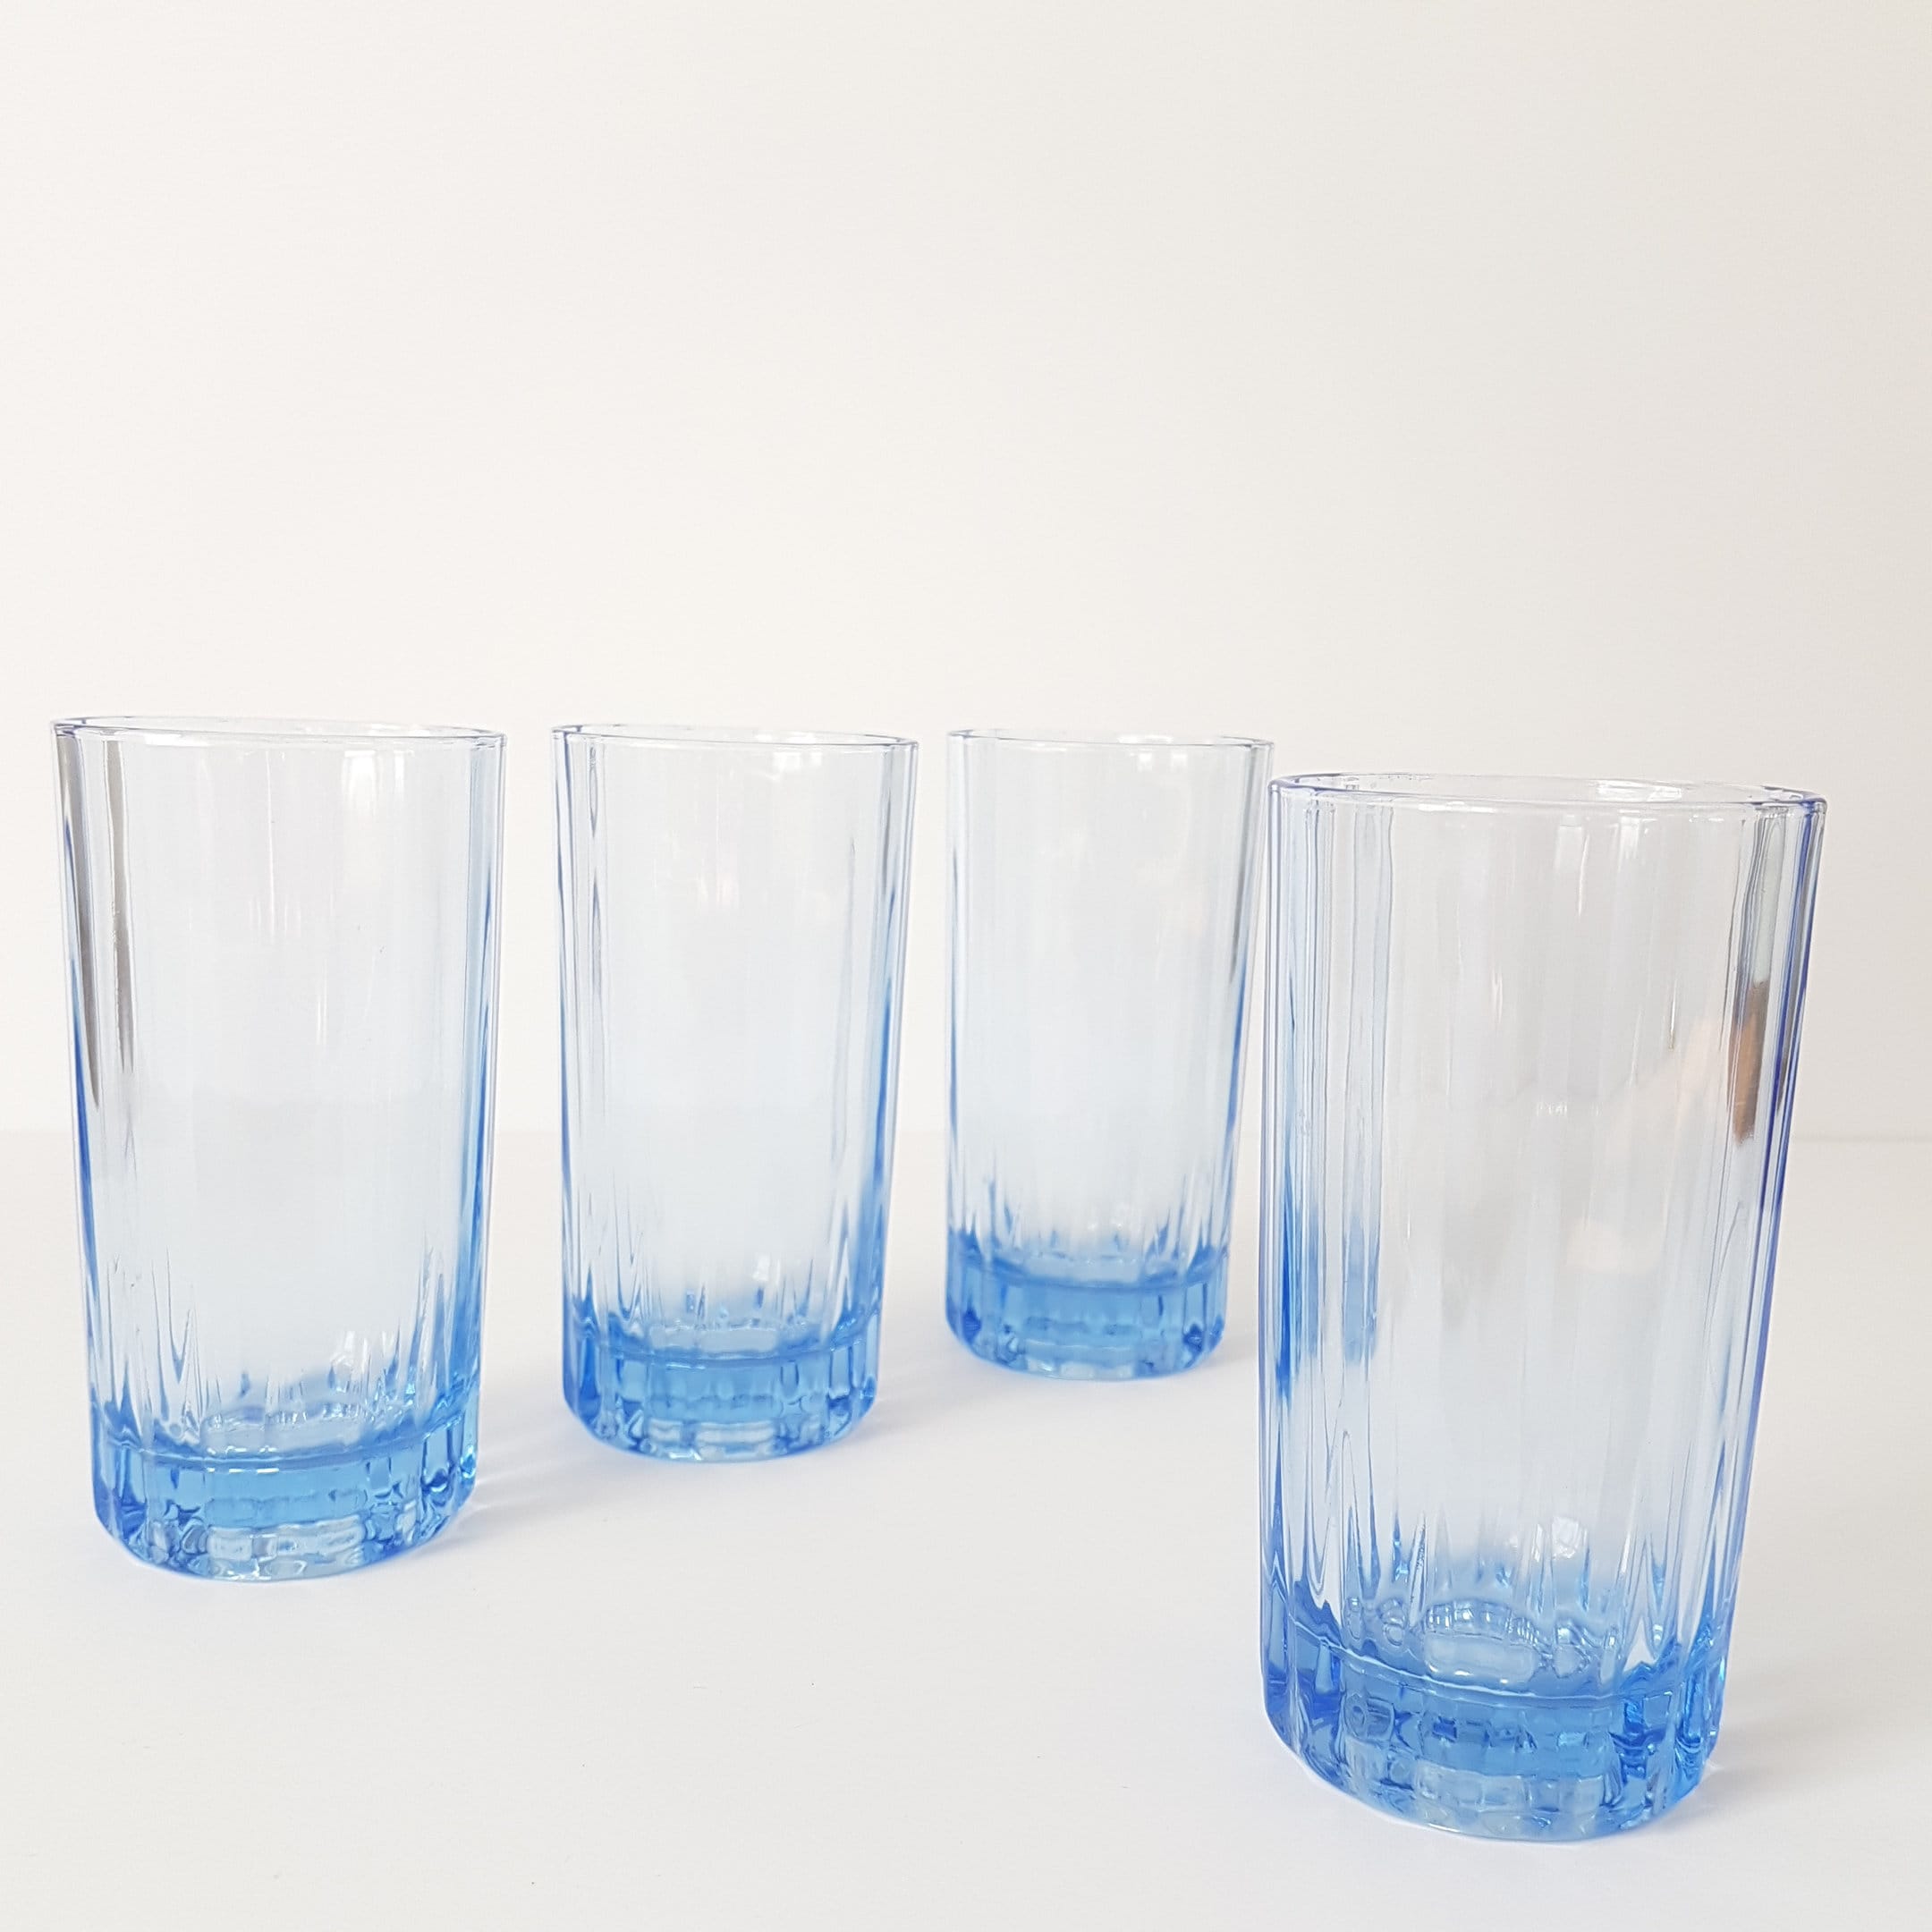 Retro Drinking Glasses Set of 4 Blue Brown Beige Graphic on Sturdy 10 Ounce  Beverage Tumblers 